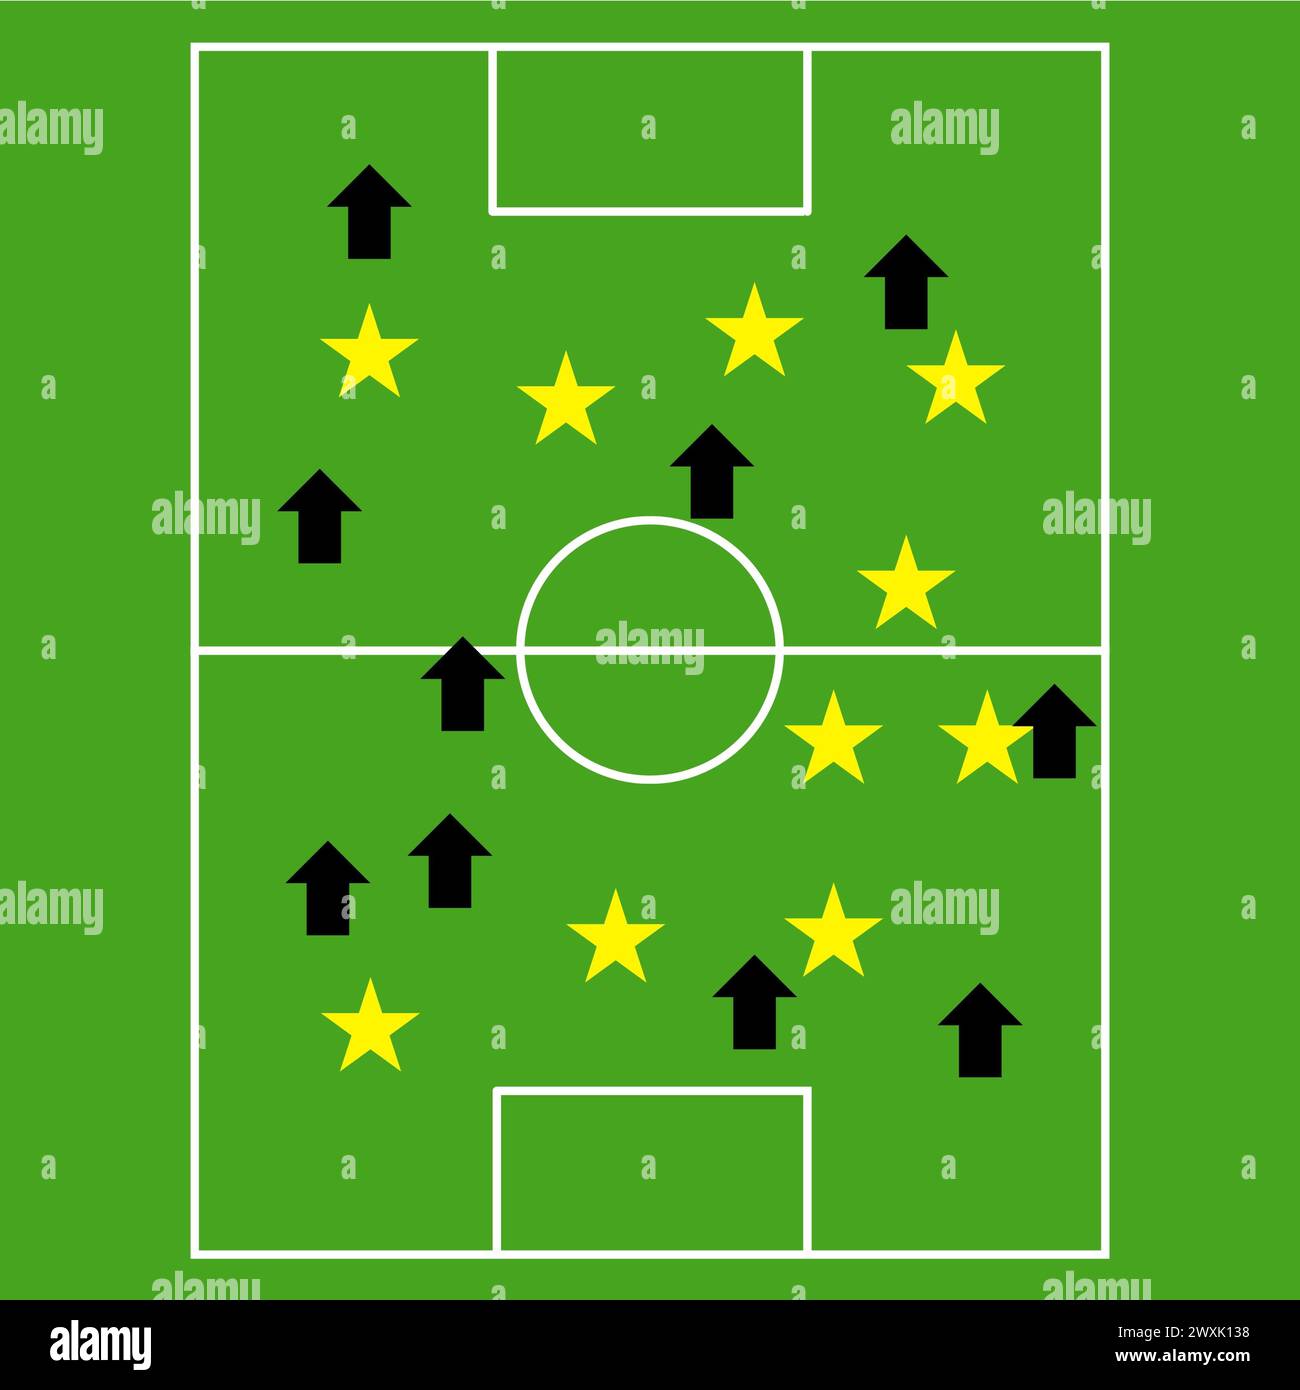 Football tactics board drawn with arrows and stars , football/soccer strategy planning board vector in green colour Stock Vector